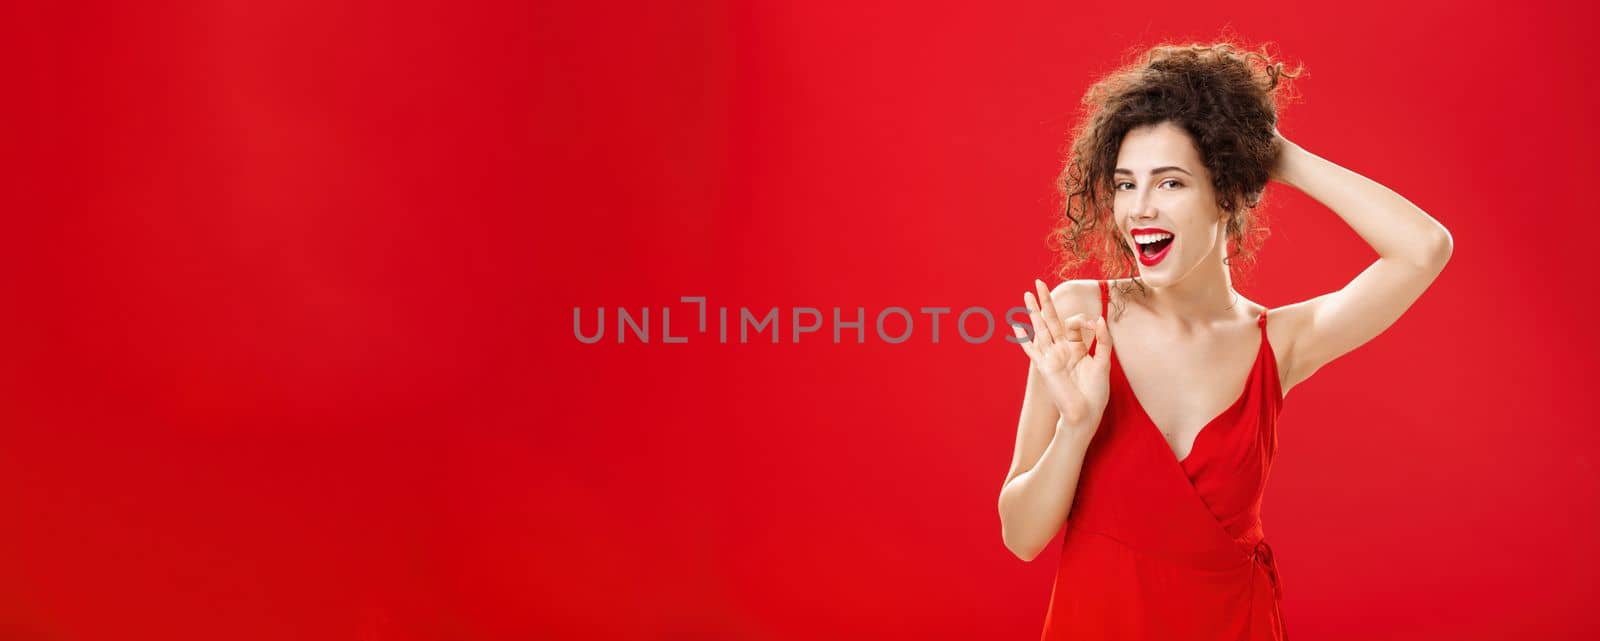 Portrait of sensual and sexy pleased carefree adult woman. gathering hair on back with hand smiling joyfully and confident while showing okay or approval gesture smiling assuring over red background.